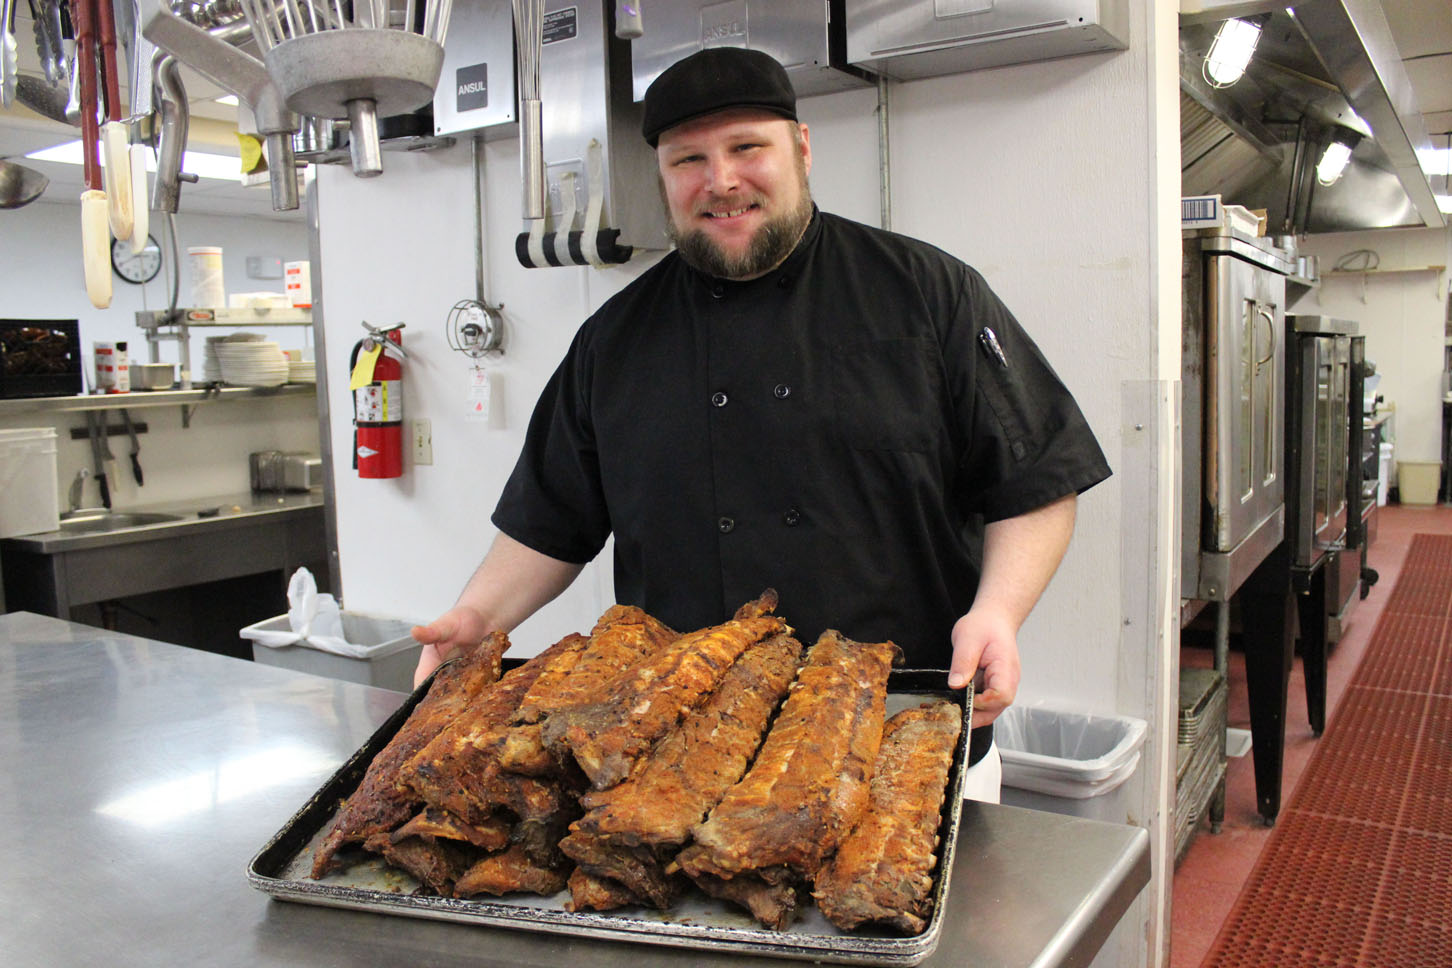 Matt Orchard, Land’s End Resort’s new executive chef, prepares babyback ribs for the resort’s guests.-Photo by McKibben Jackinsky, Homer News